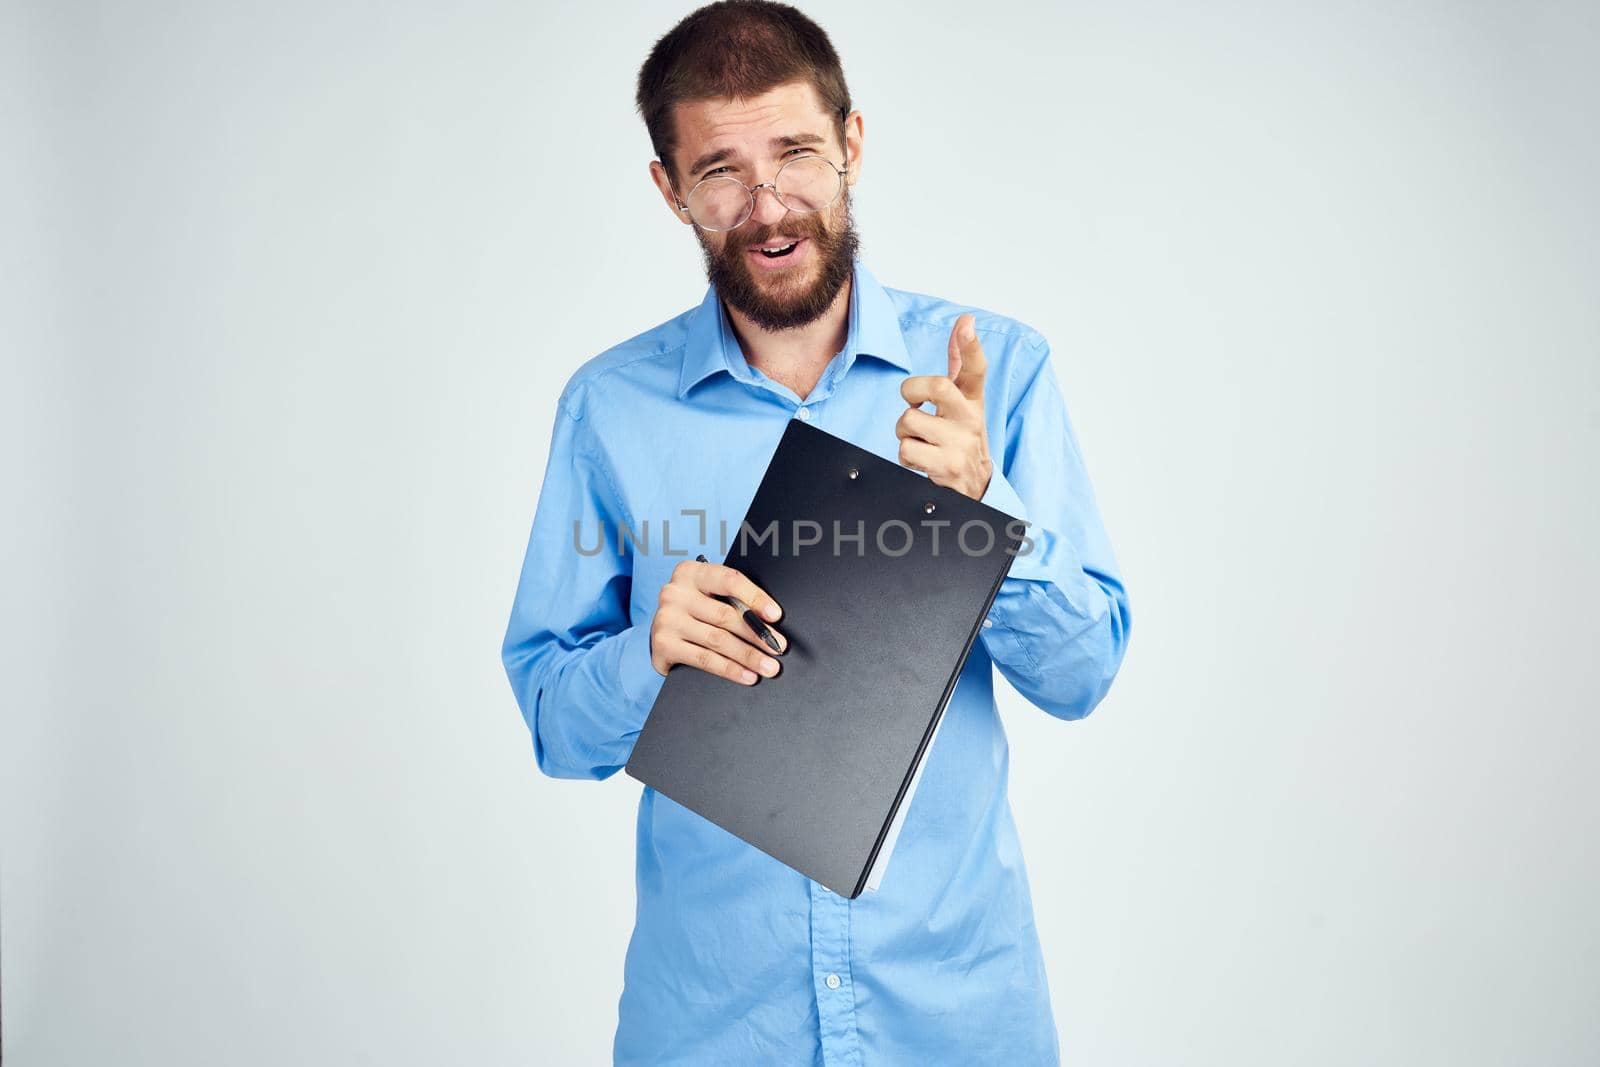 manager in blue shirt wearing glasses success emotions Professional. High quality photo